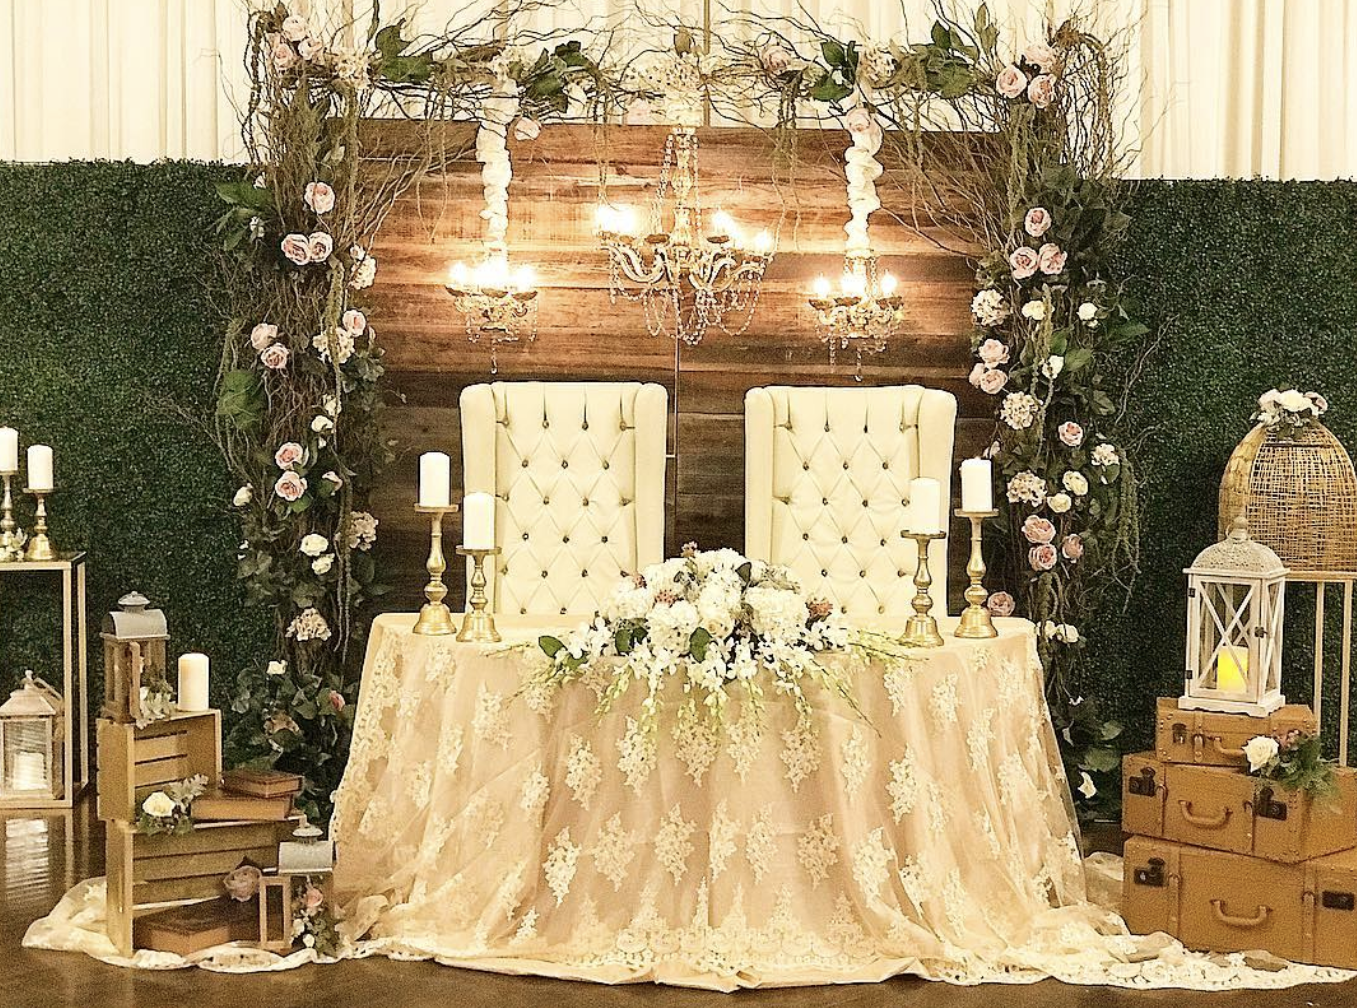 Vintage Decor Wedding Tips, a lace covered ceremony table with flowers, candles, wooden crates and a flower wall back drop